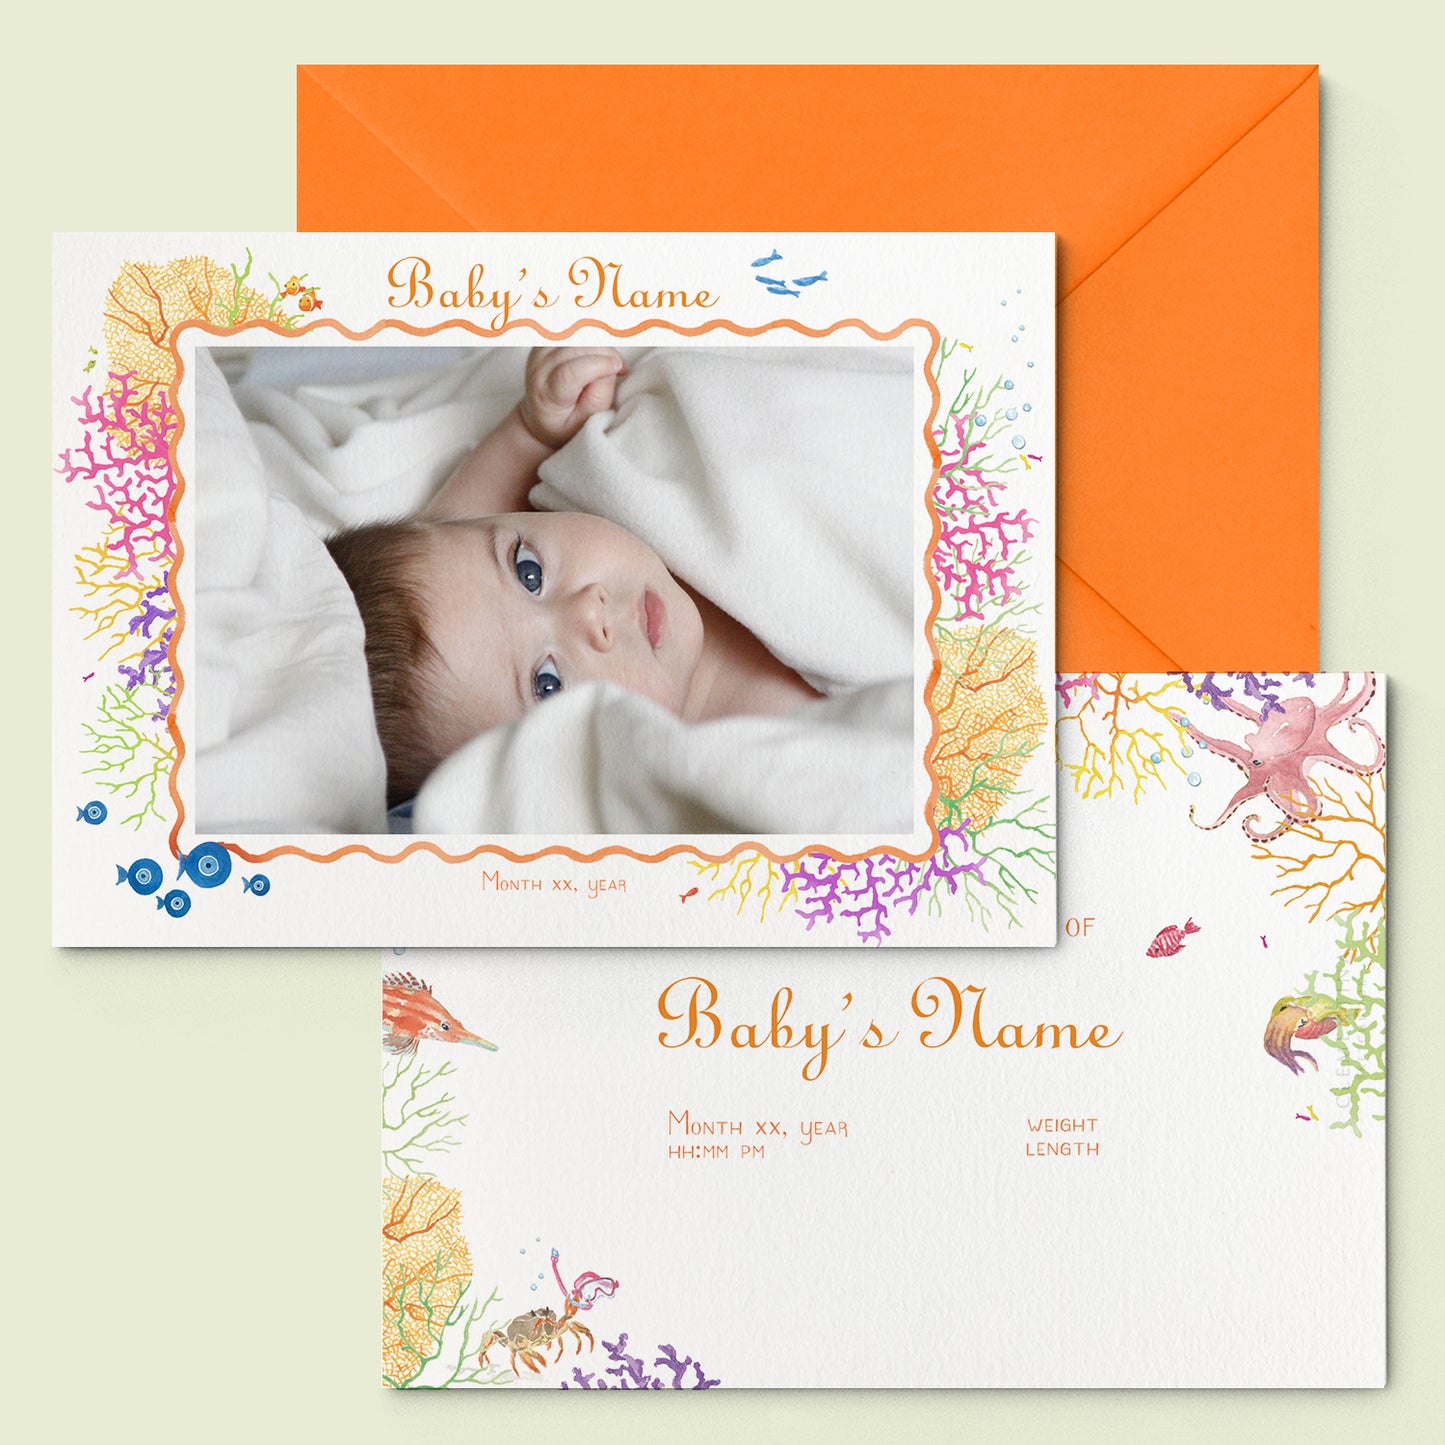 Coral Reef Printed Birth Announcements - With Photo - 06